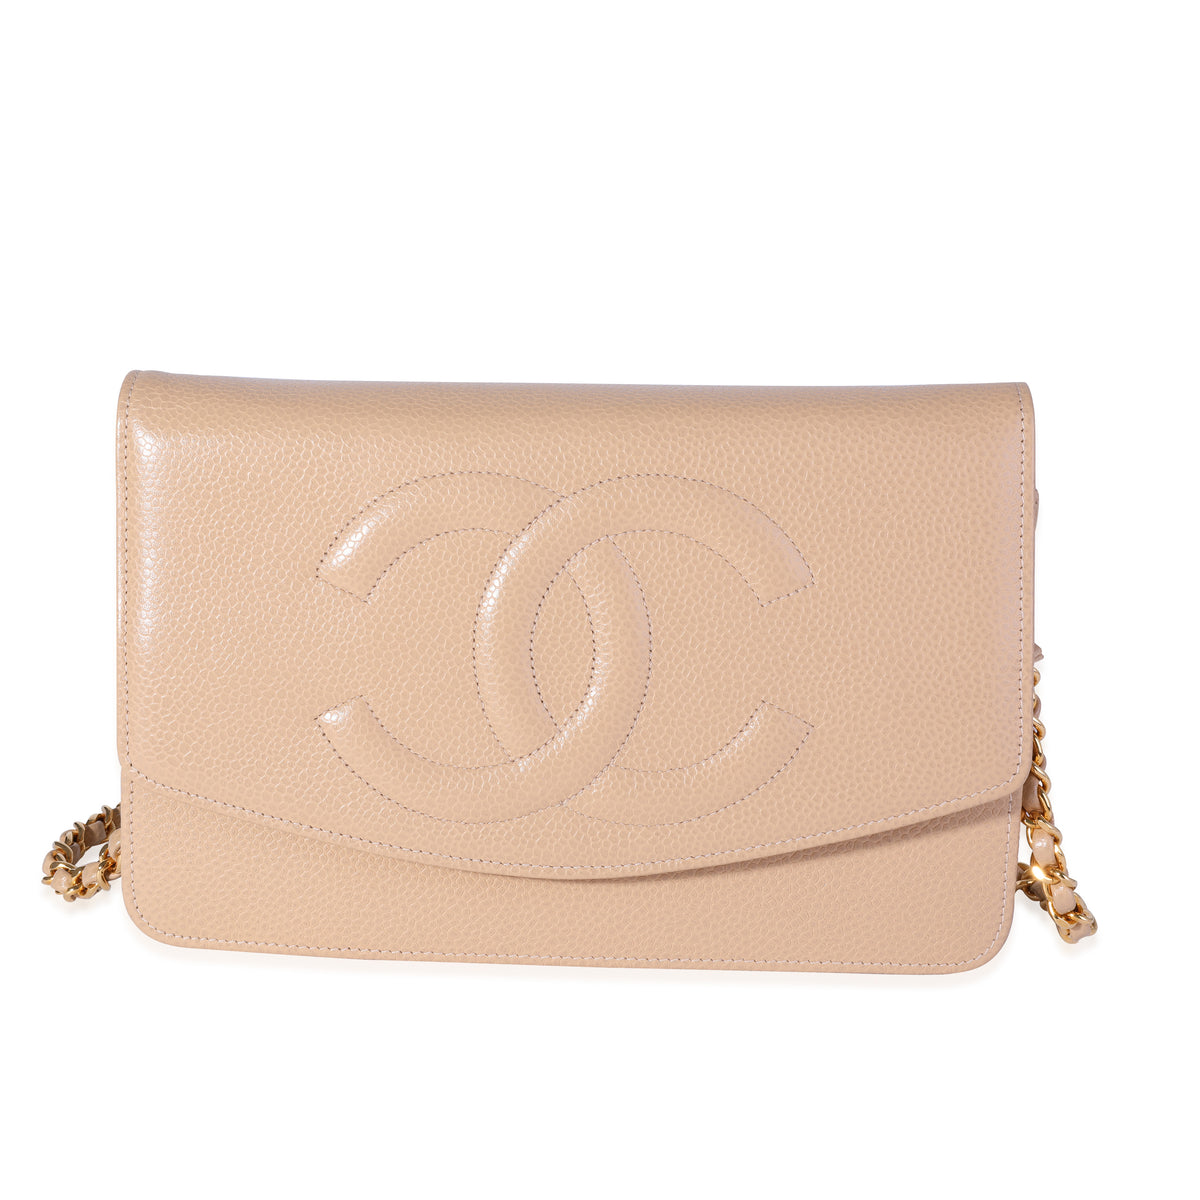 Chanel - Authenticated Timeless/Classique Wallet - Leather Beige Plain for Women, Never Worn, with Tag